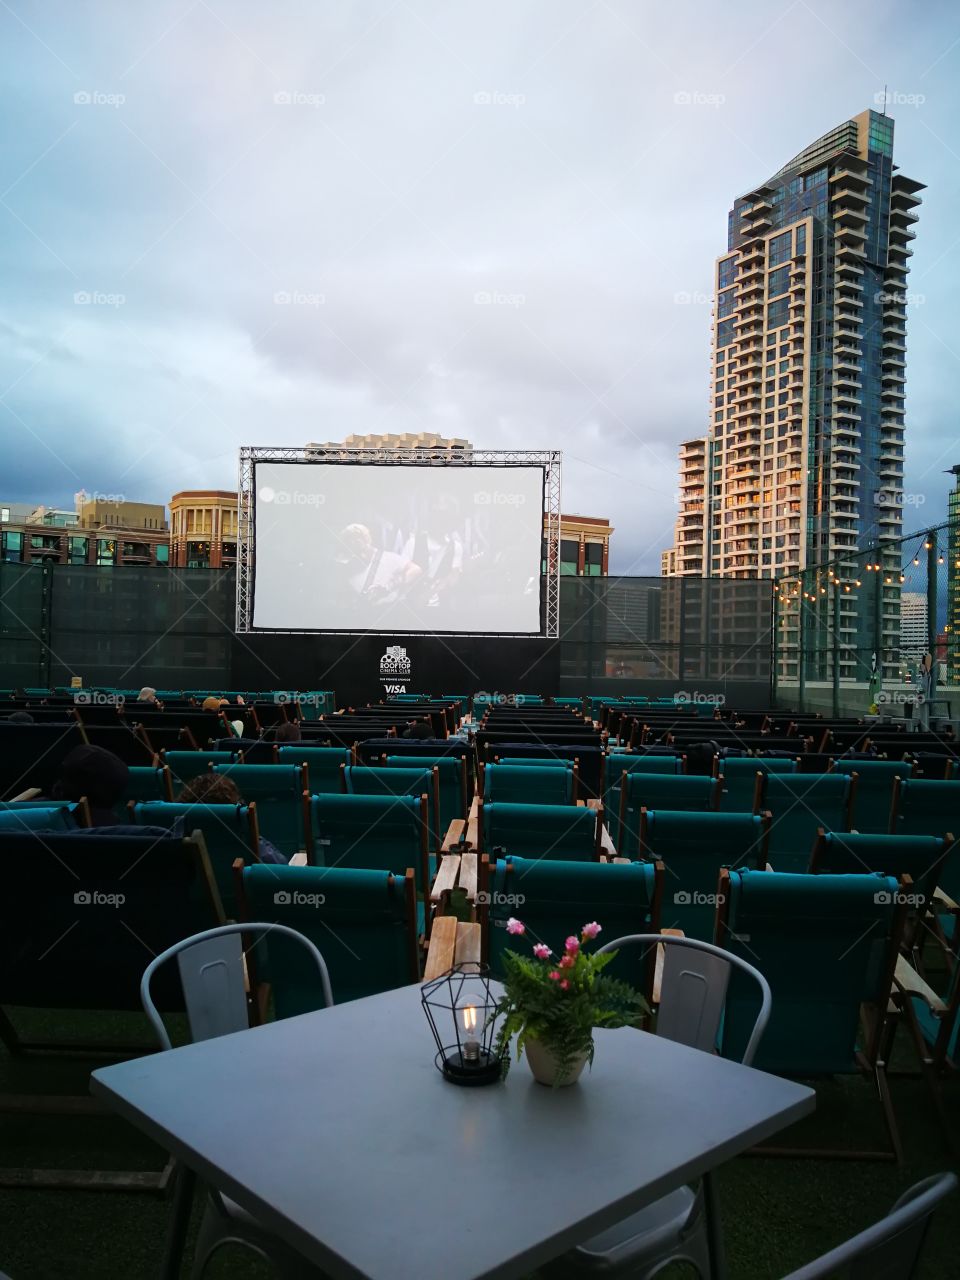 Rooftop movies